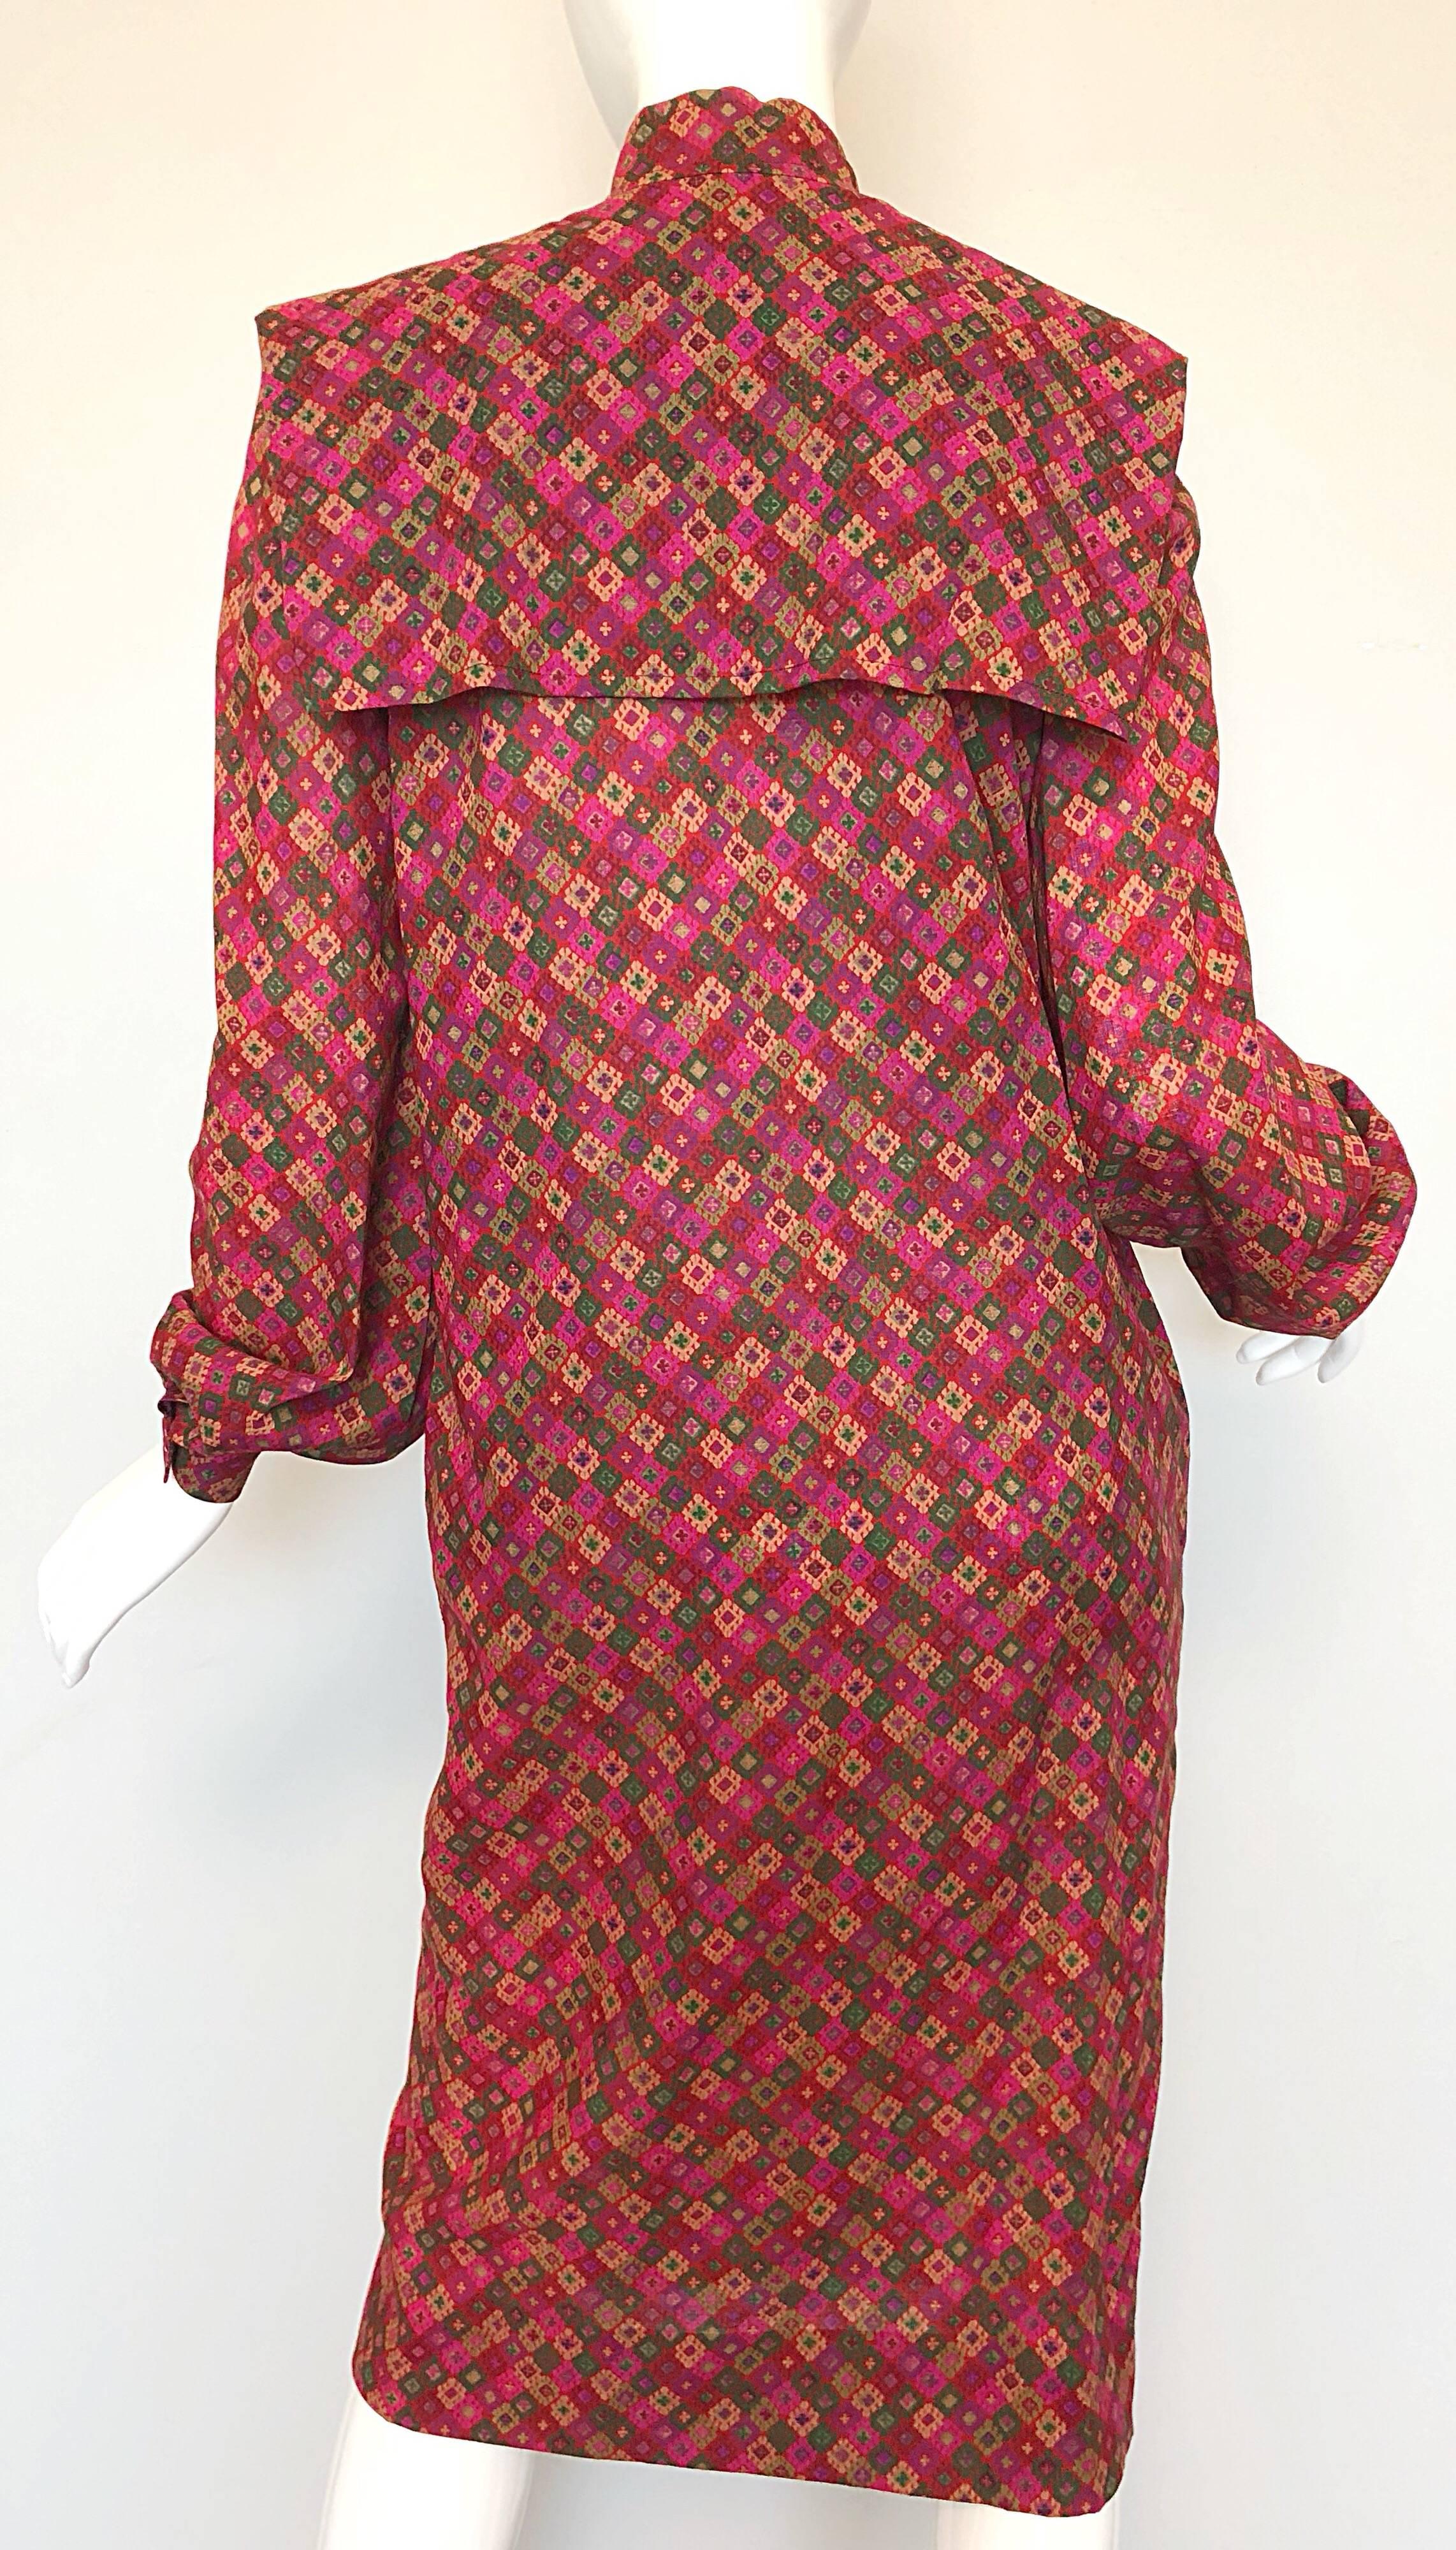 Women's Vintage Givenchy 1980s Mosaic Tile Print Pink + Green Lightweight Wool Sac Dress For Sale